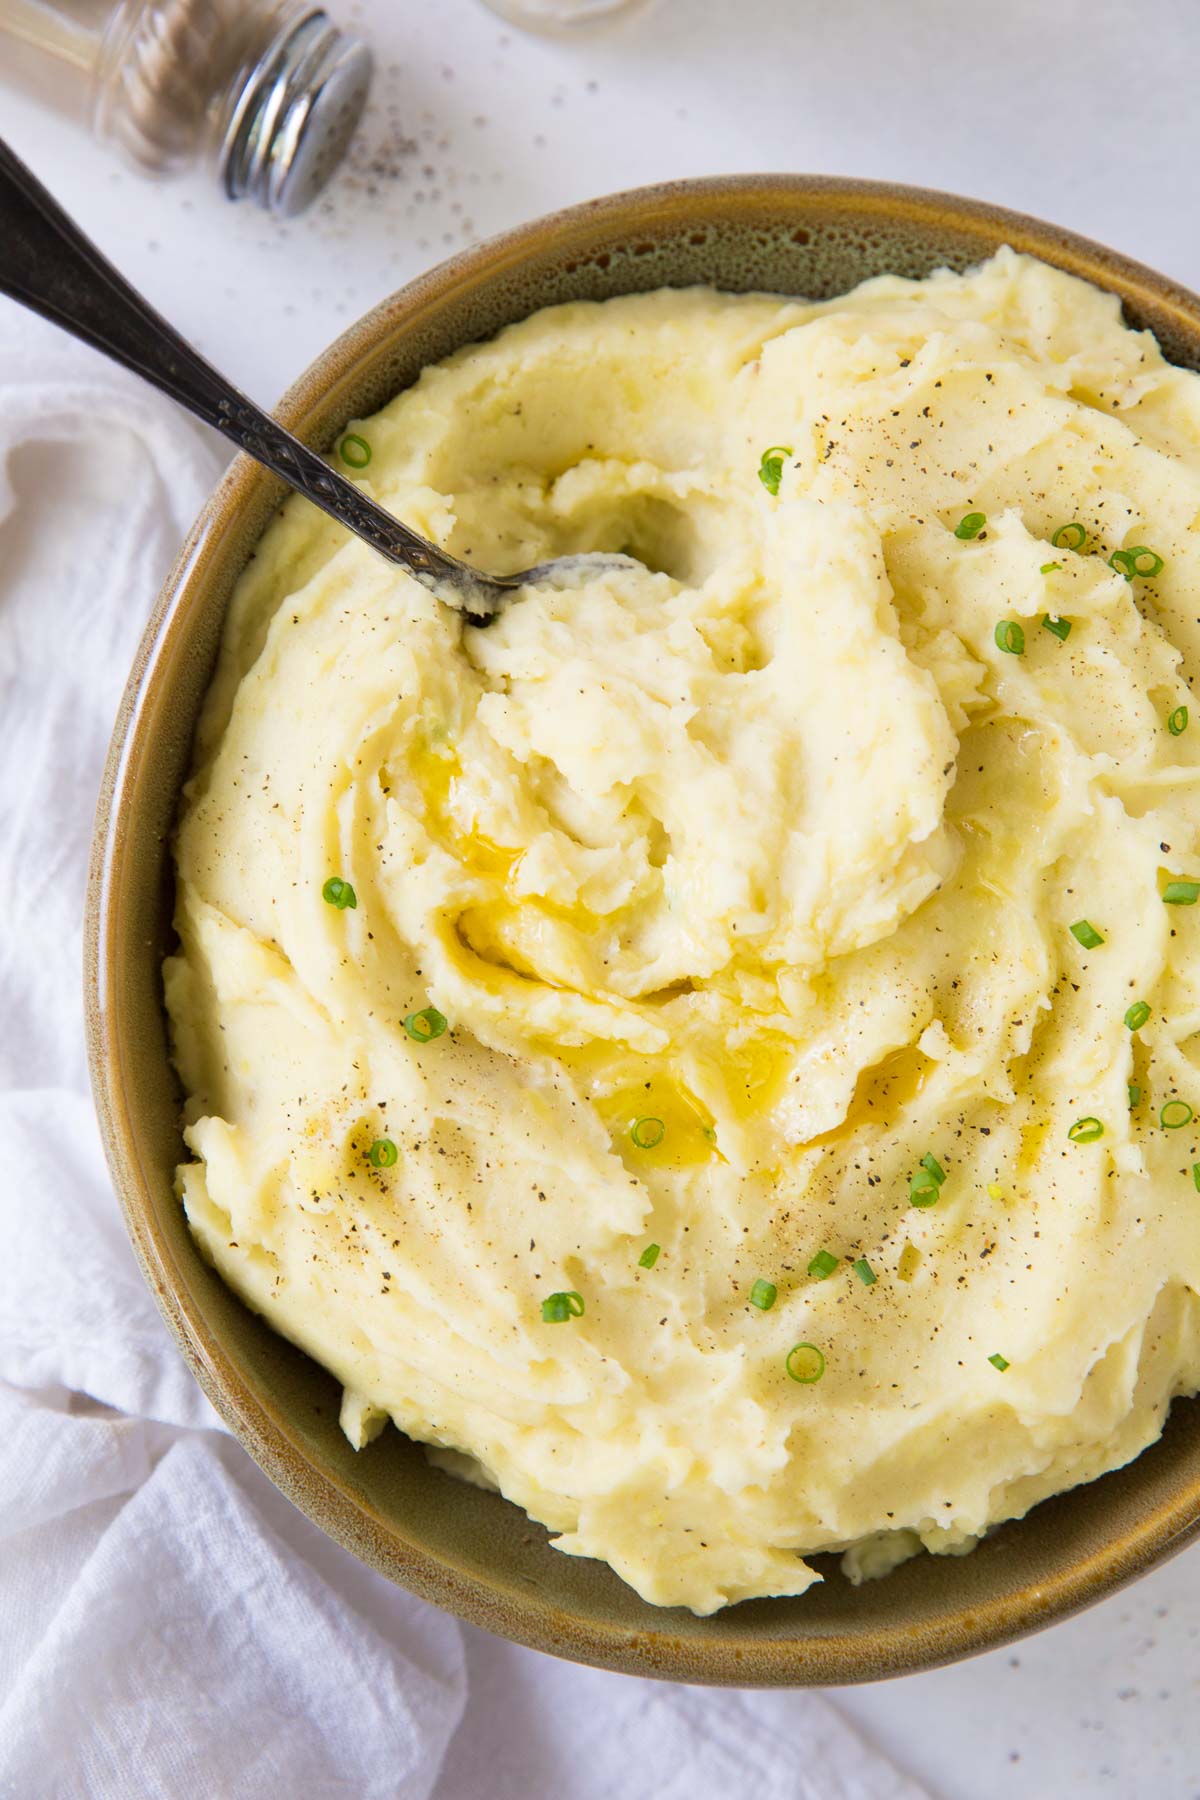 mashed potatoes in a bowl with a serving spoon